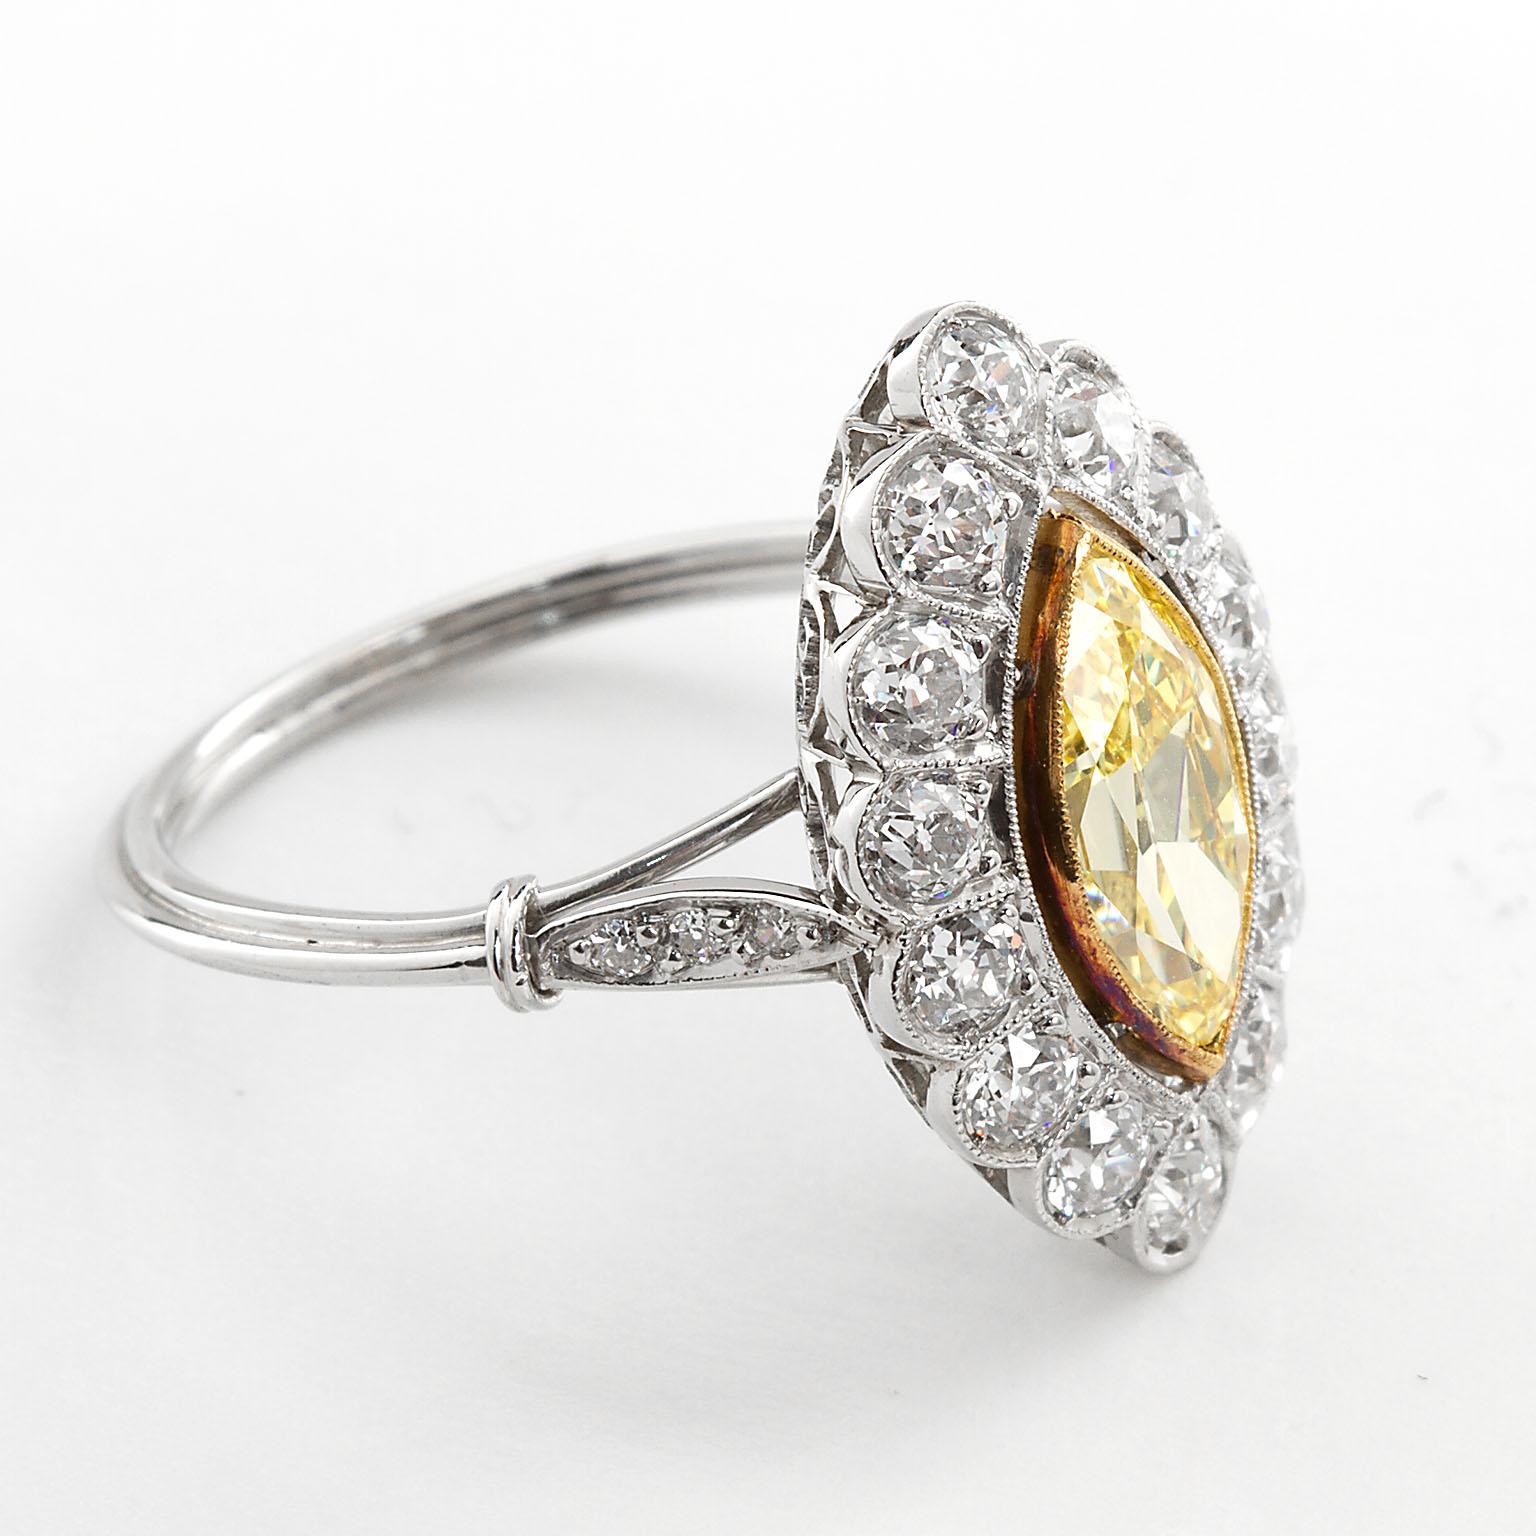 An original Art Deco period cluster ring of white gold and yellow gold set with a 1.16 carat Fancy Intense Yellow color Marquise shape diamond with Internally Flawless clarity characteristics according to the accompanying GIA Diamond Report.
The